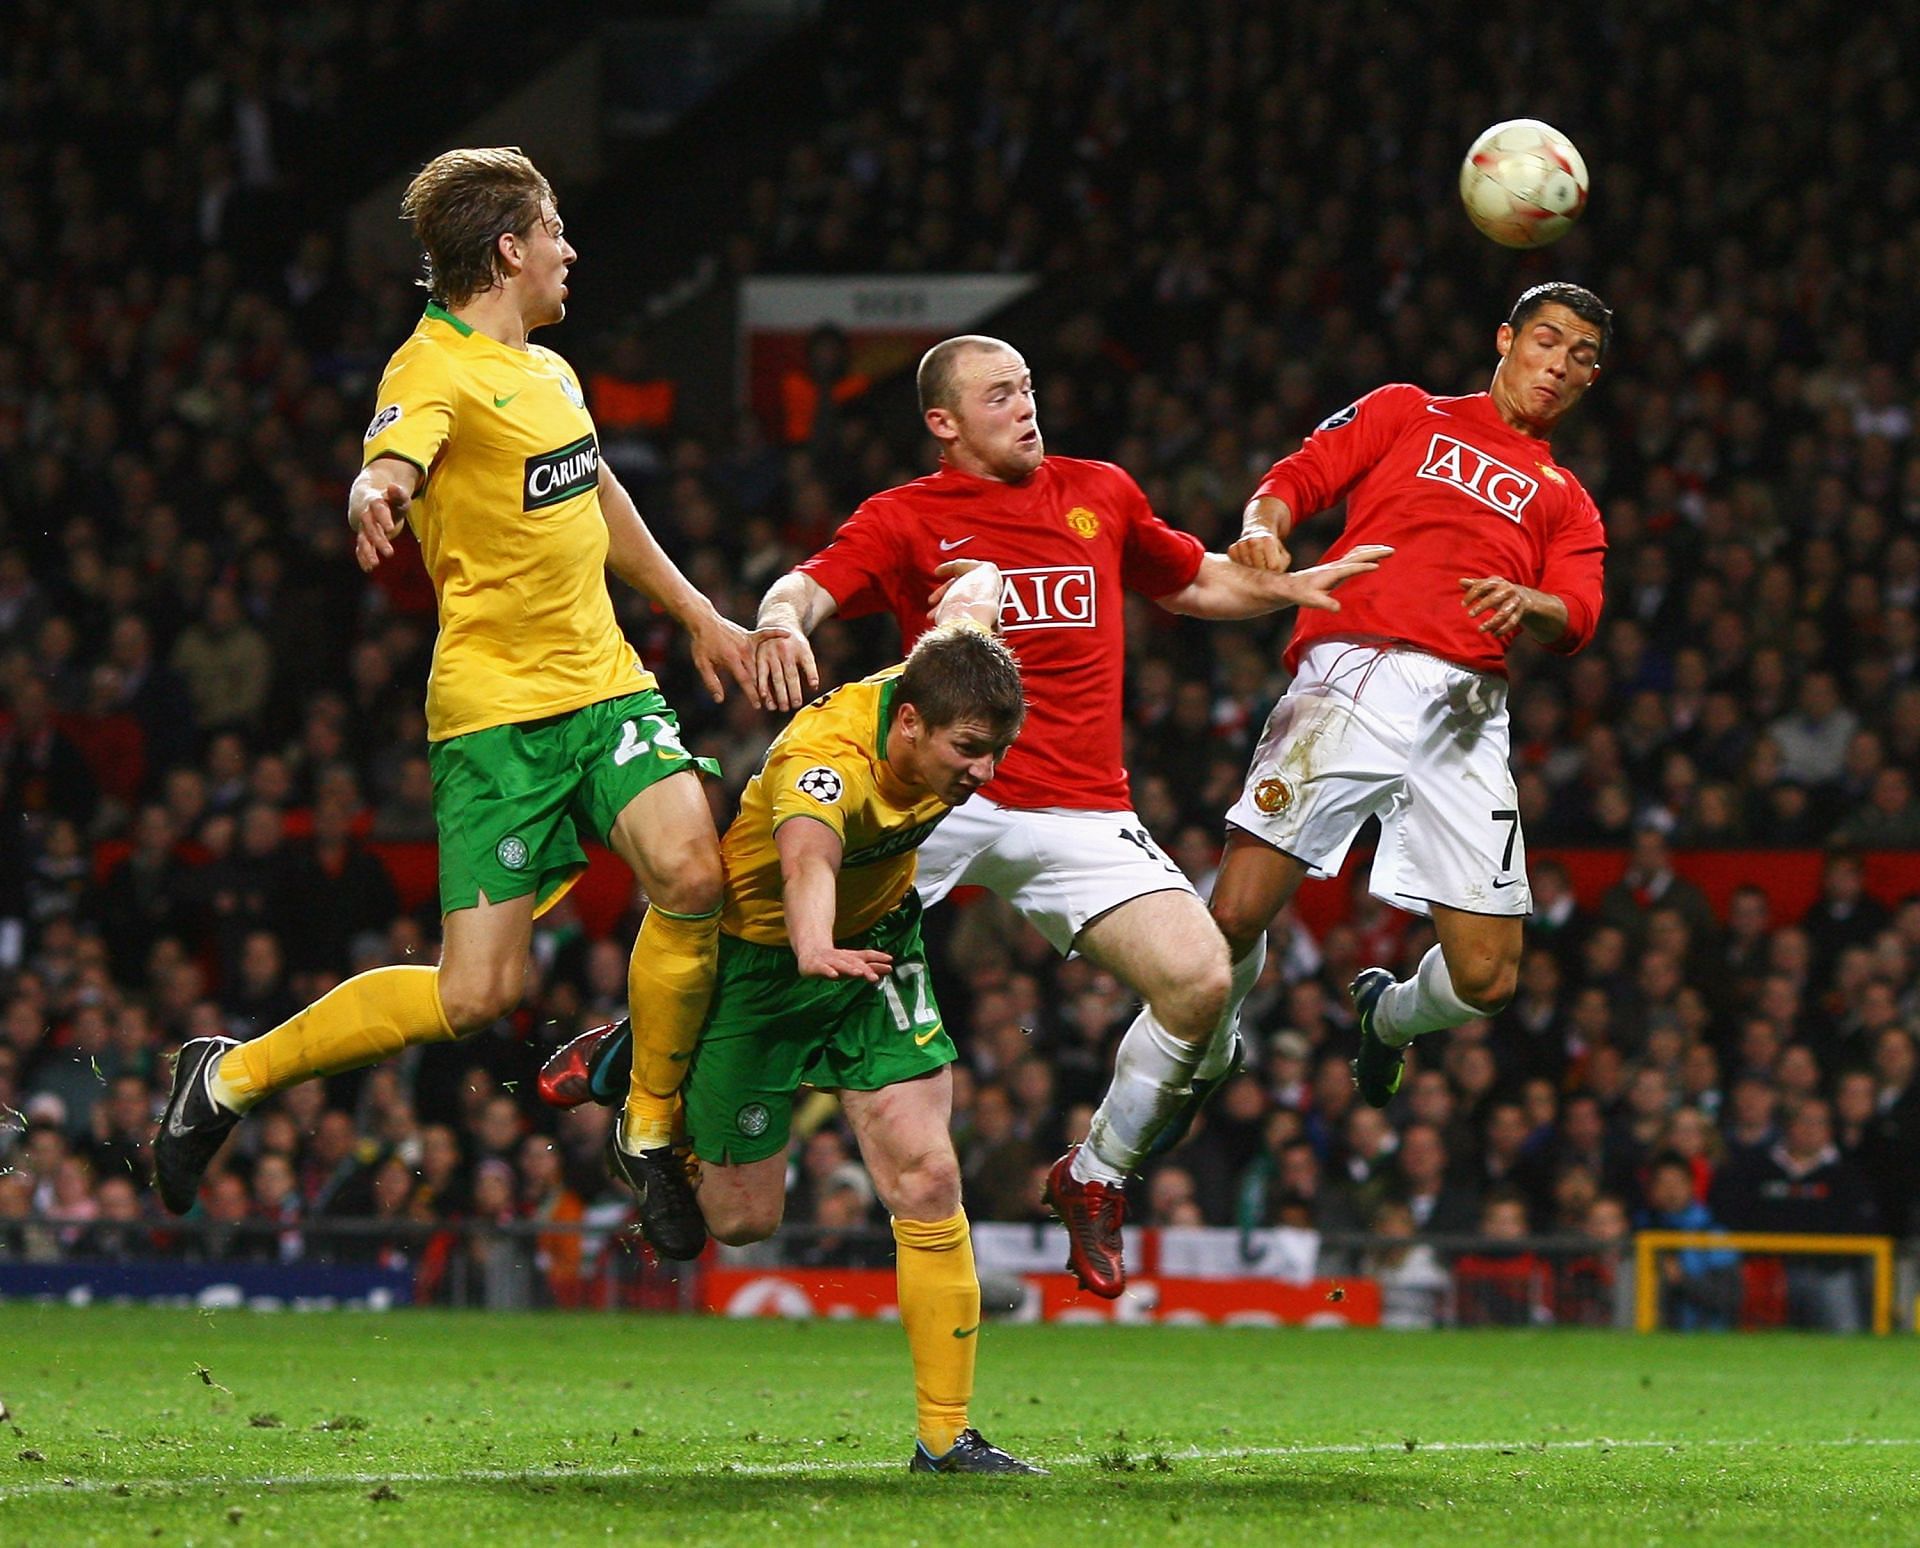 Cristiano Ronaldo in action with Wayne Rooney during the Champions League 2007/2008 campaign (Manchester United vs Celtic - October 2008)